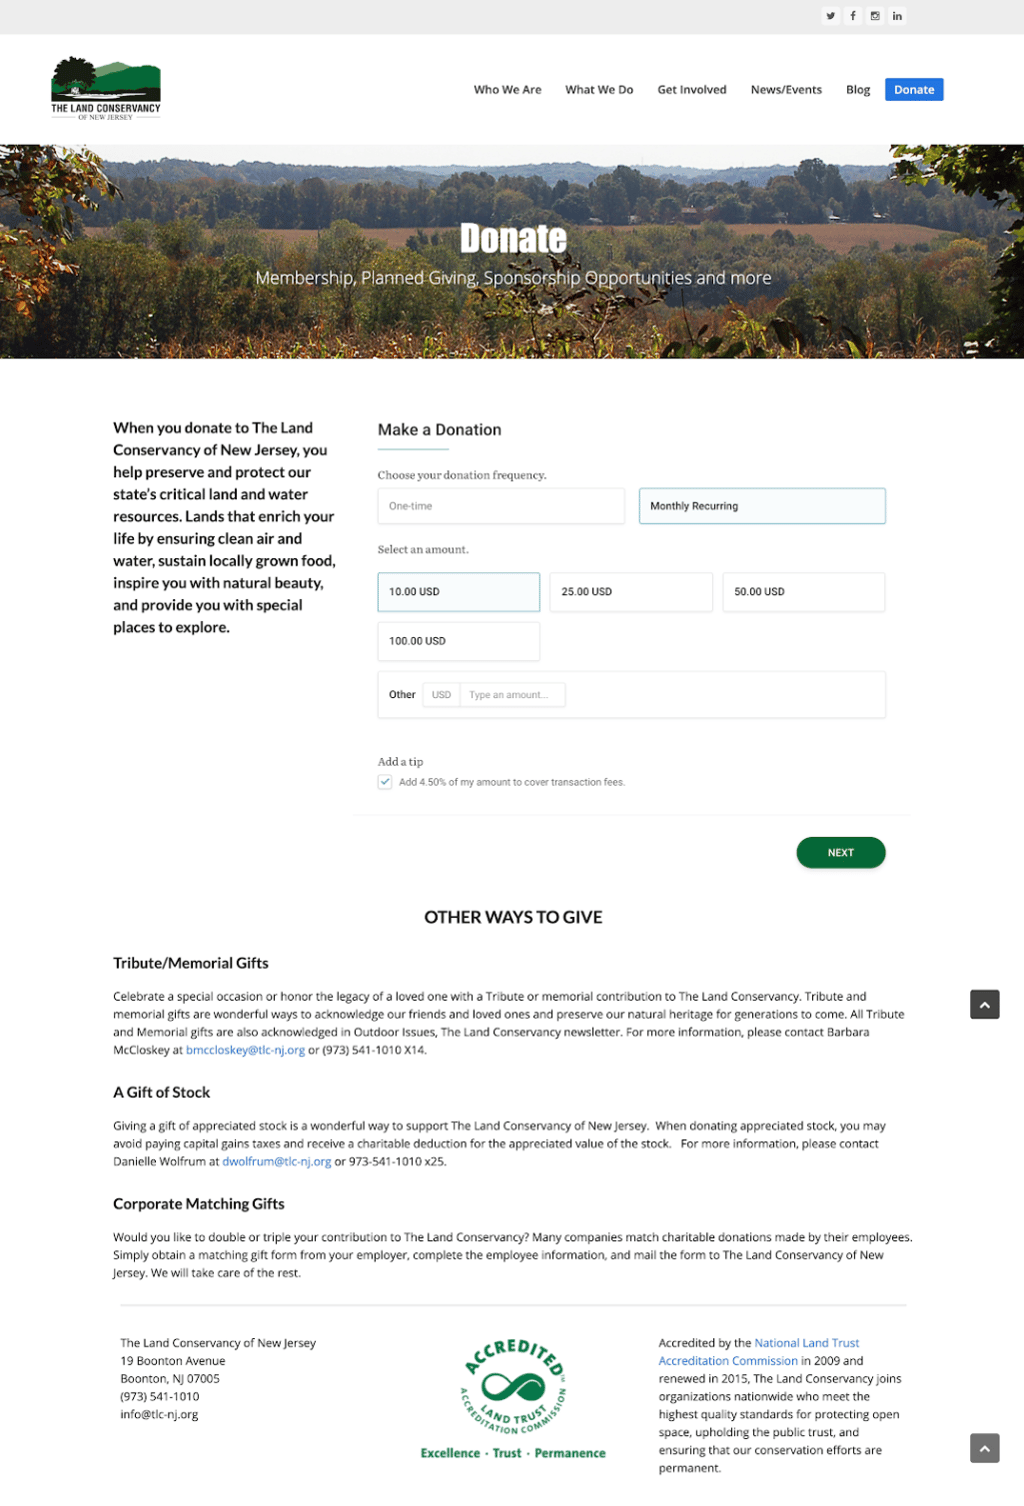 screenshot of Land Conservancy page with a donation form and single CTA "Next", followed by smaller text explaining other ways to give and contact information for tribute, stock, or matching gifts